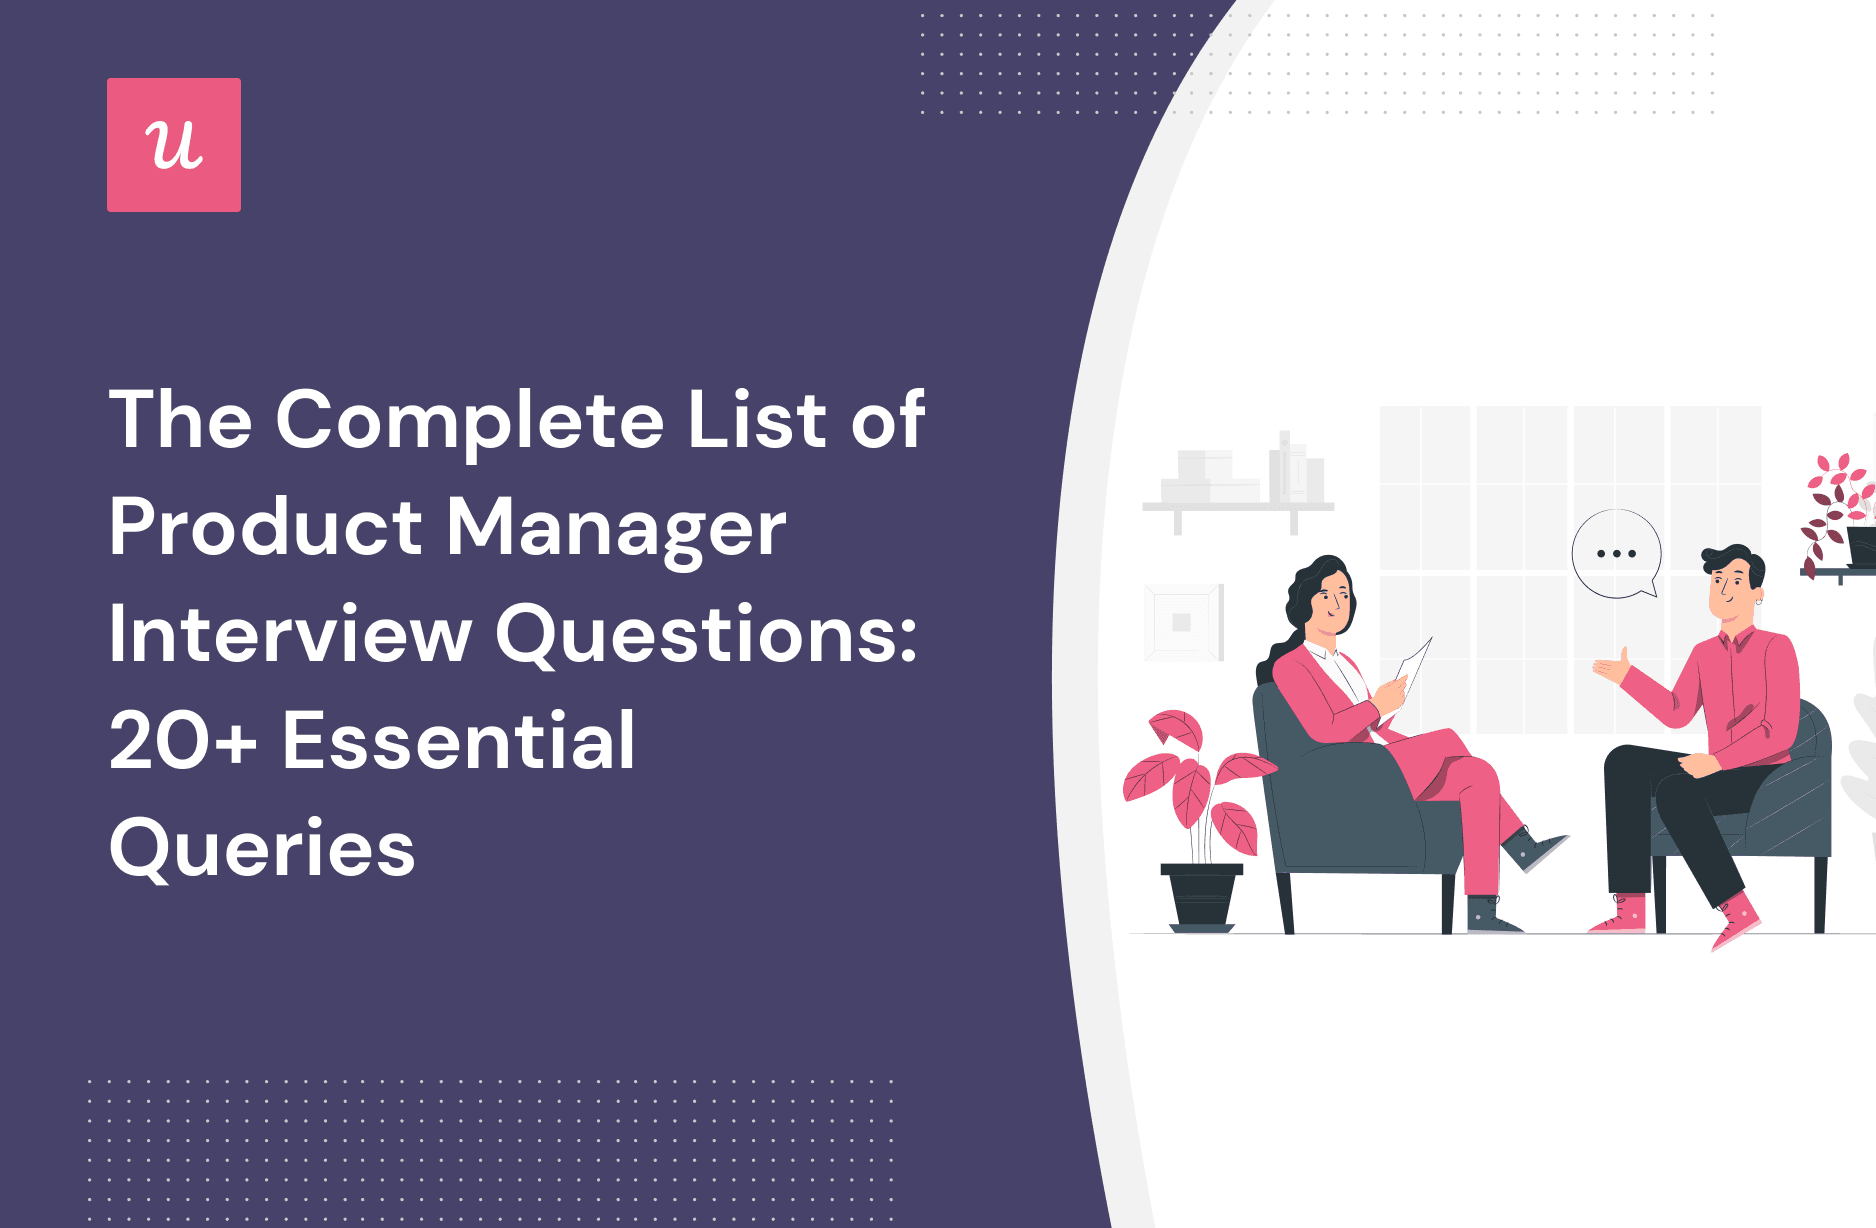 The Complete List of Product Manager Interview Questions: 20+ Essential Queries cover